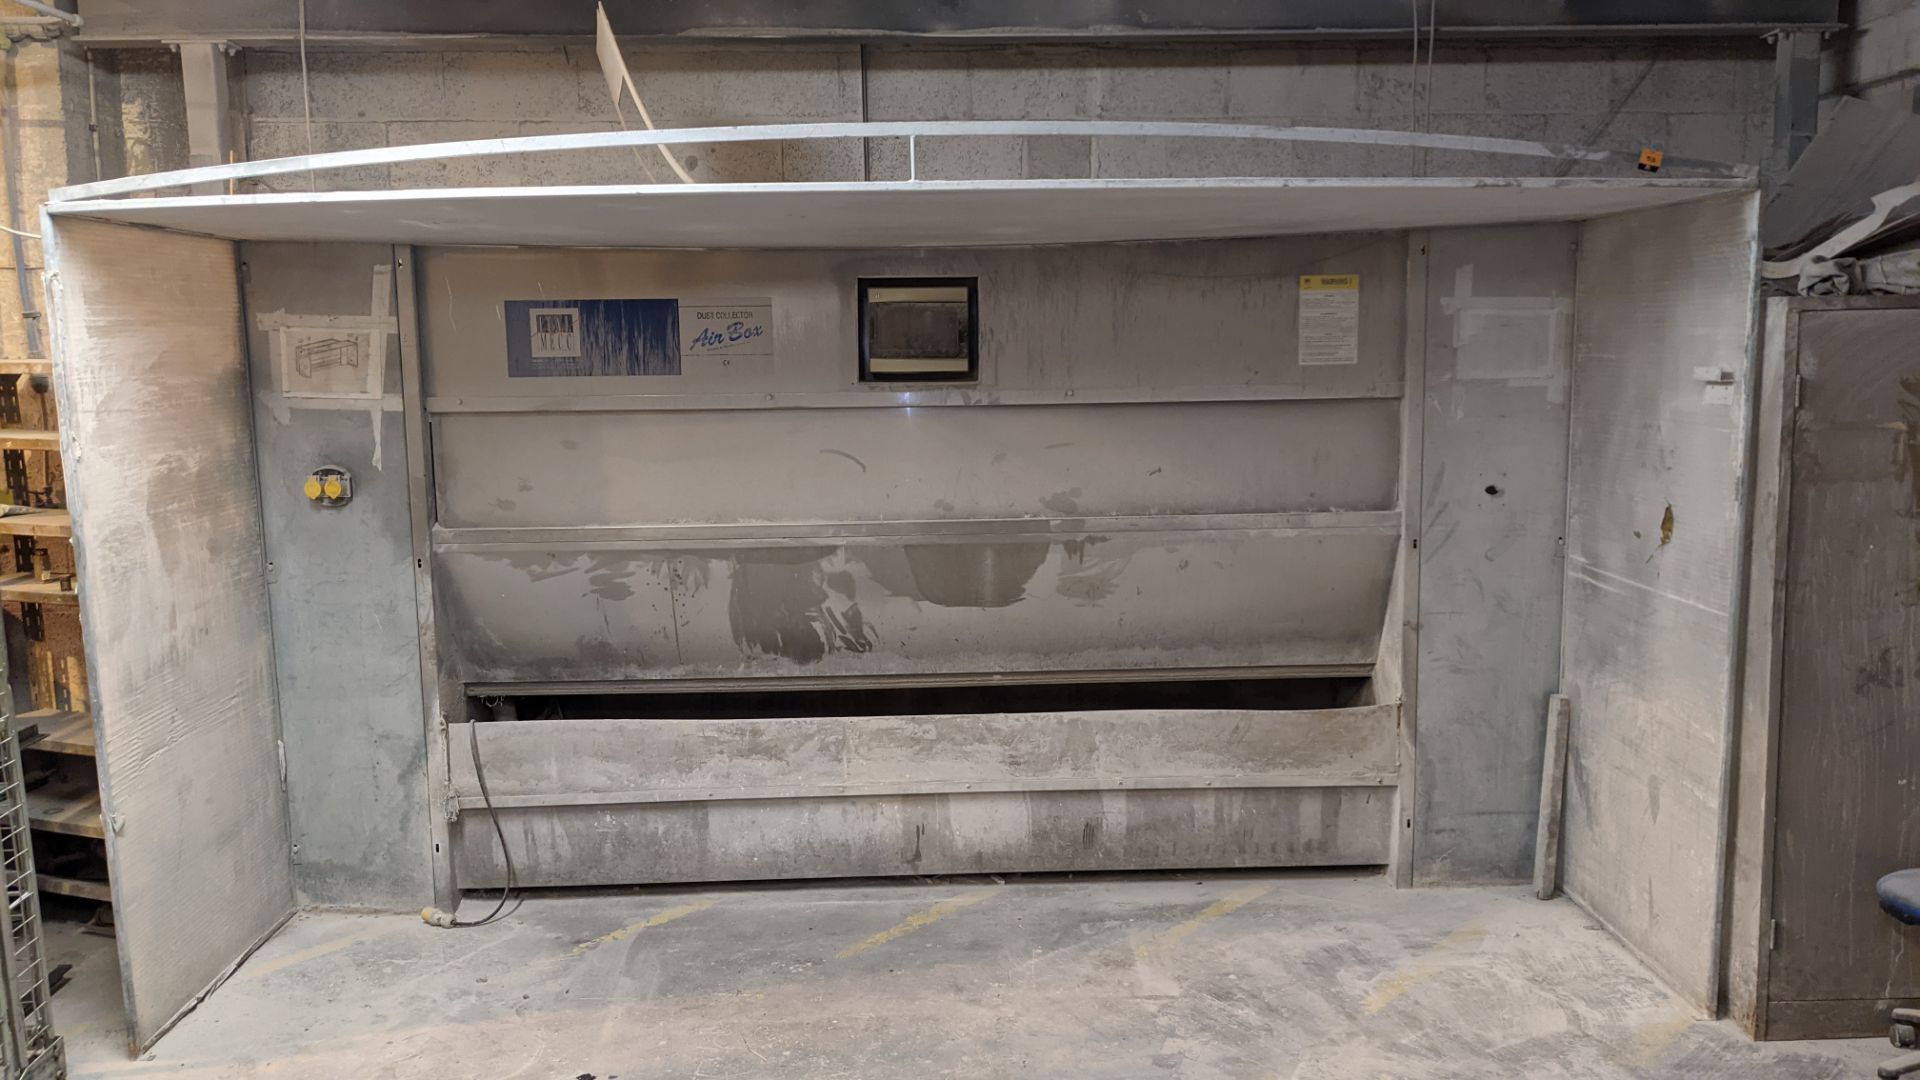 2006 Italmecc air box dust collector wet back spray booth, serial no. 0523 - Image 3 of 14